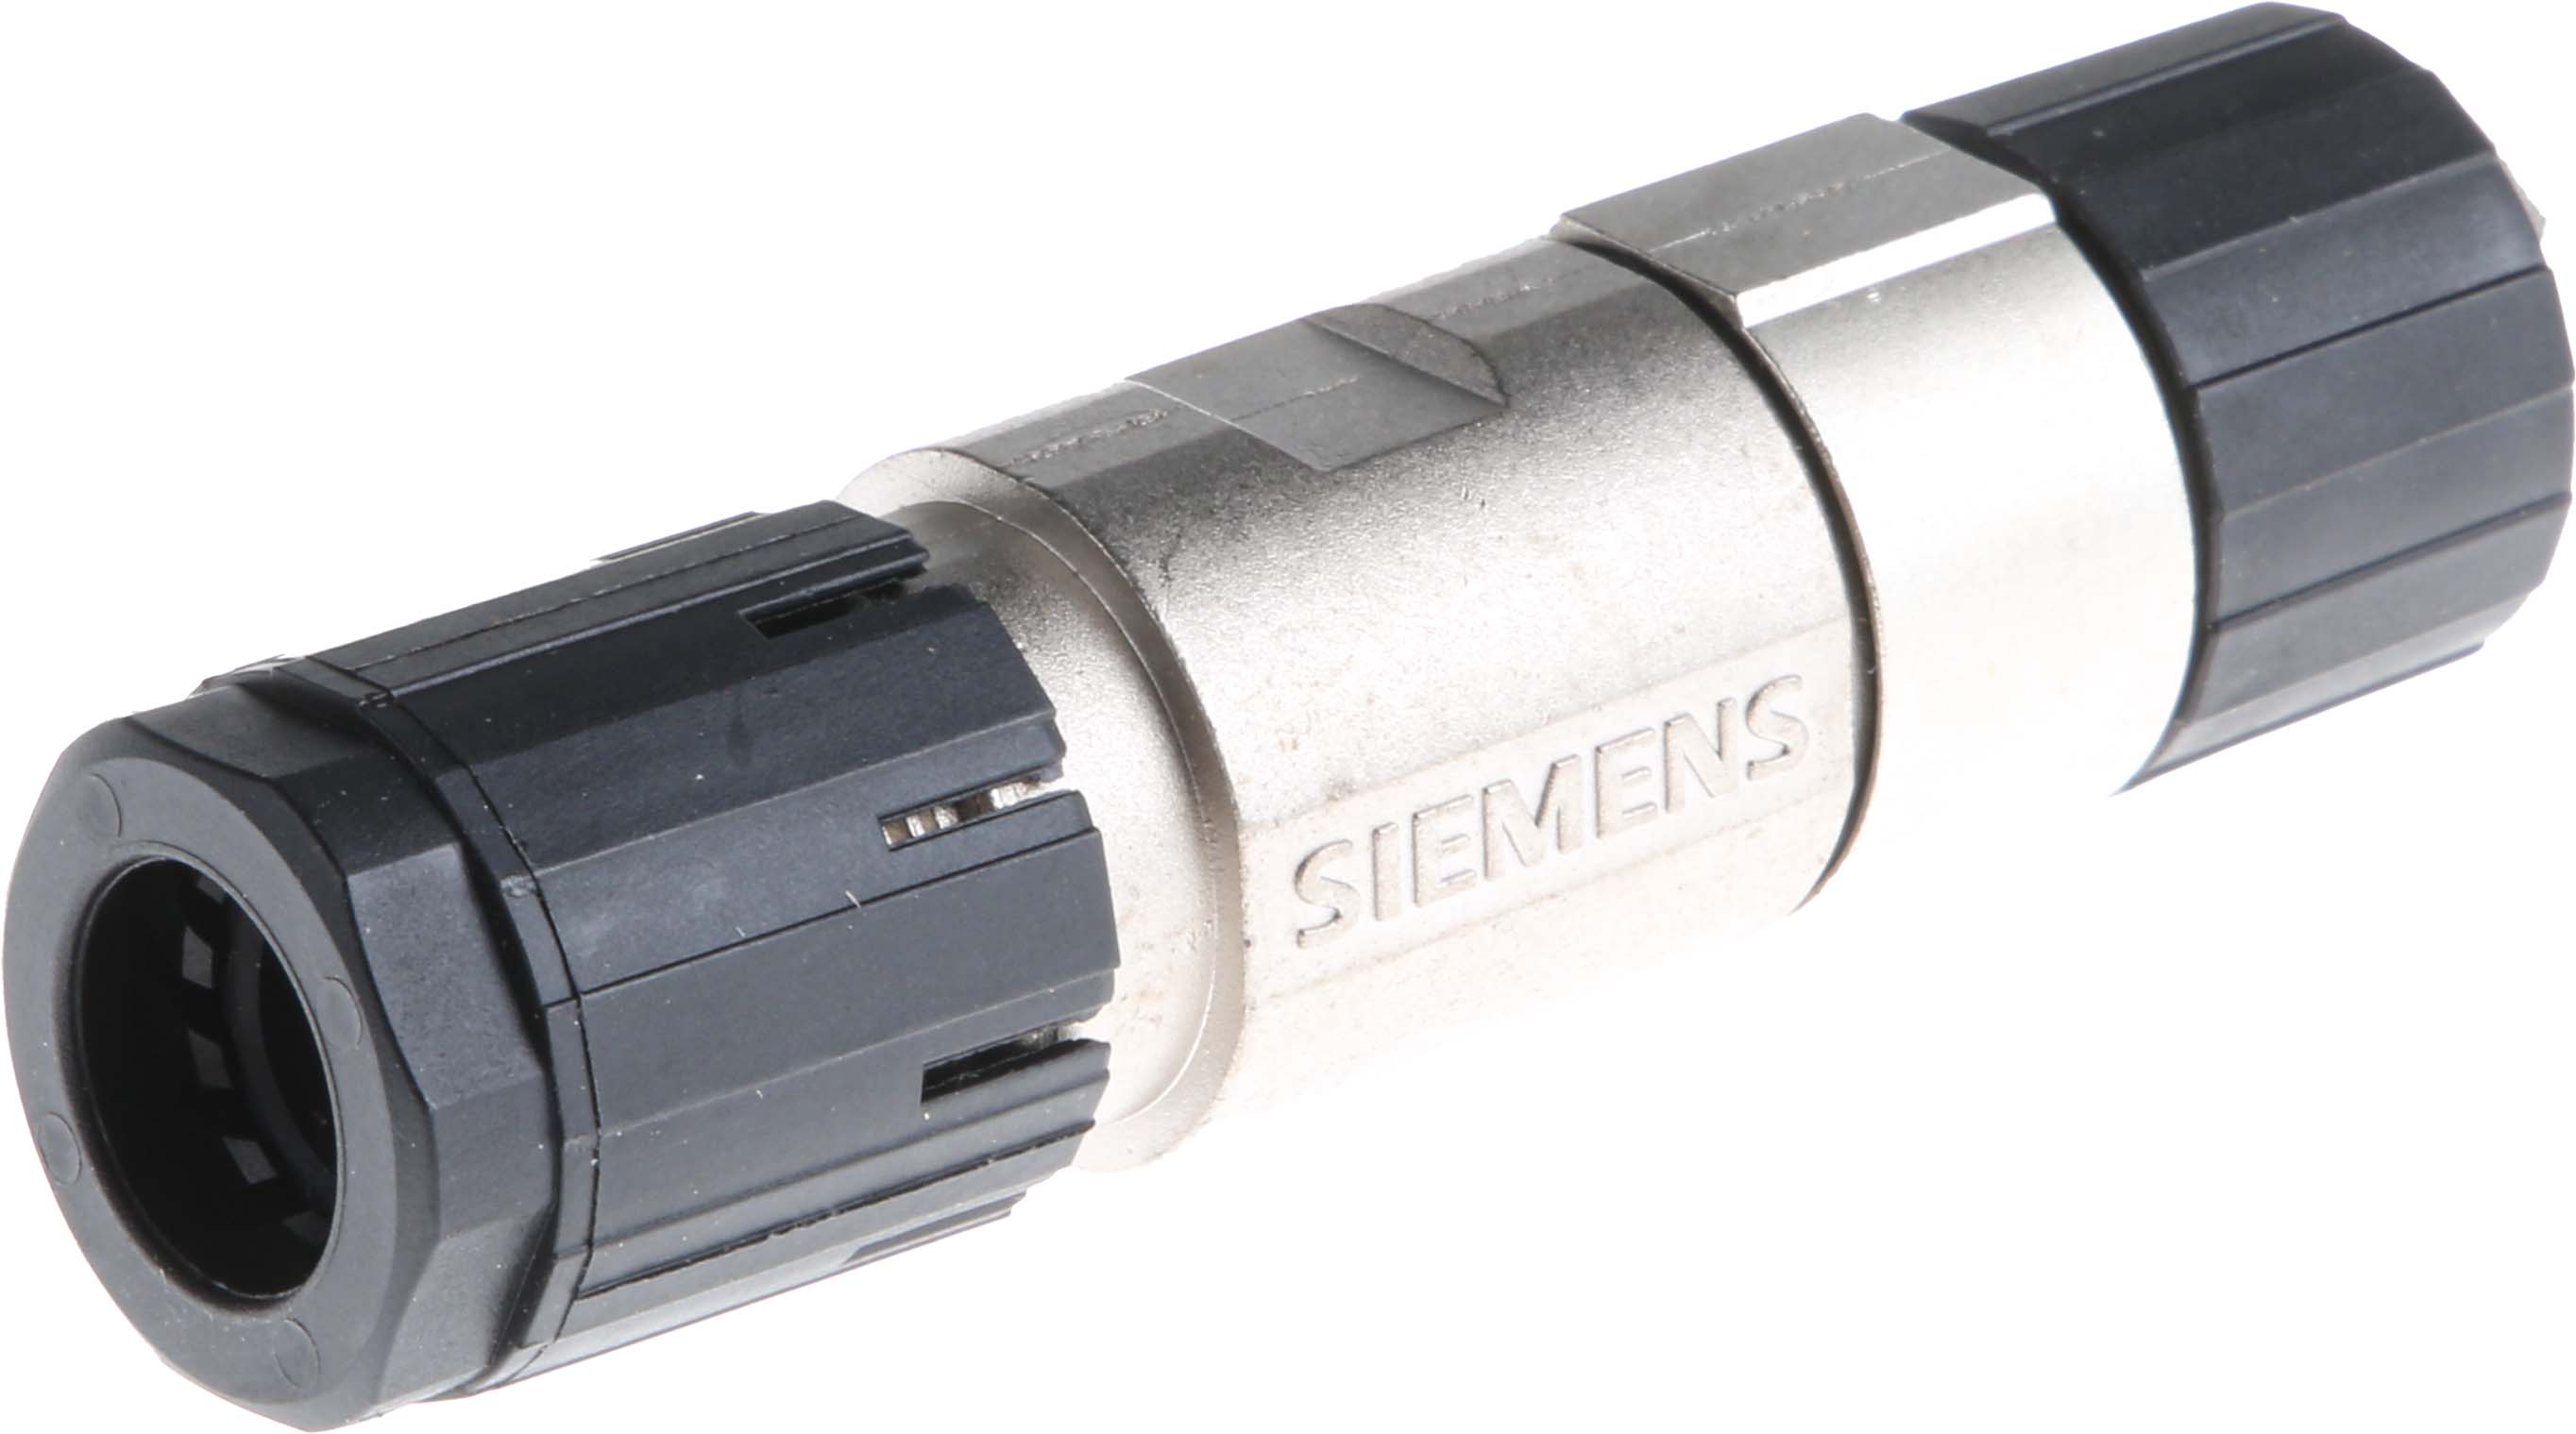 Siemens Data Acquisition Connector for Use with RS485 Network